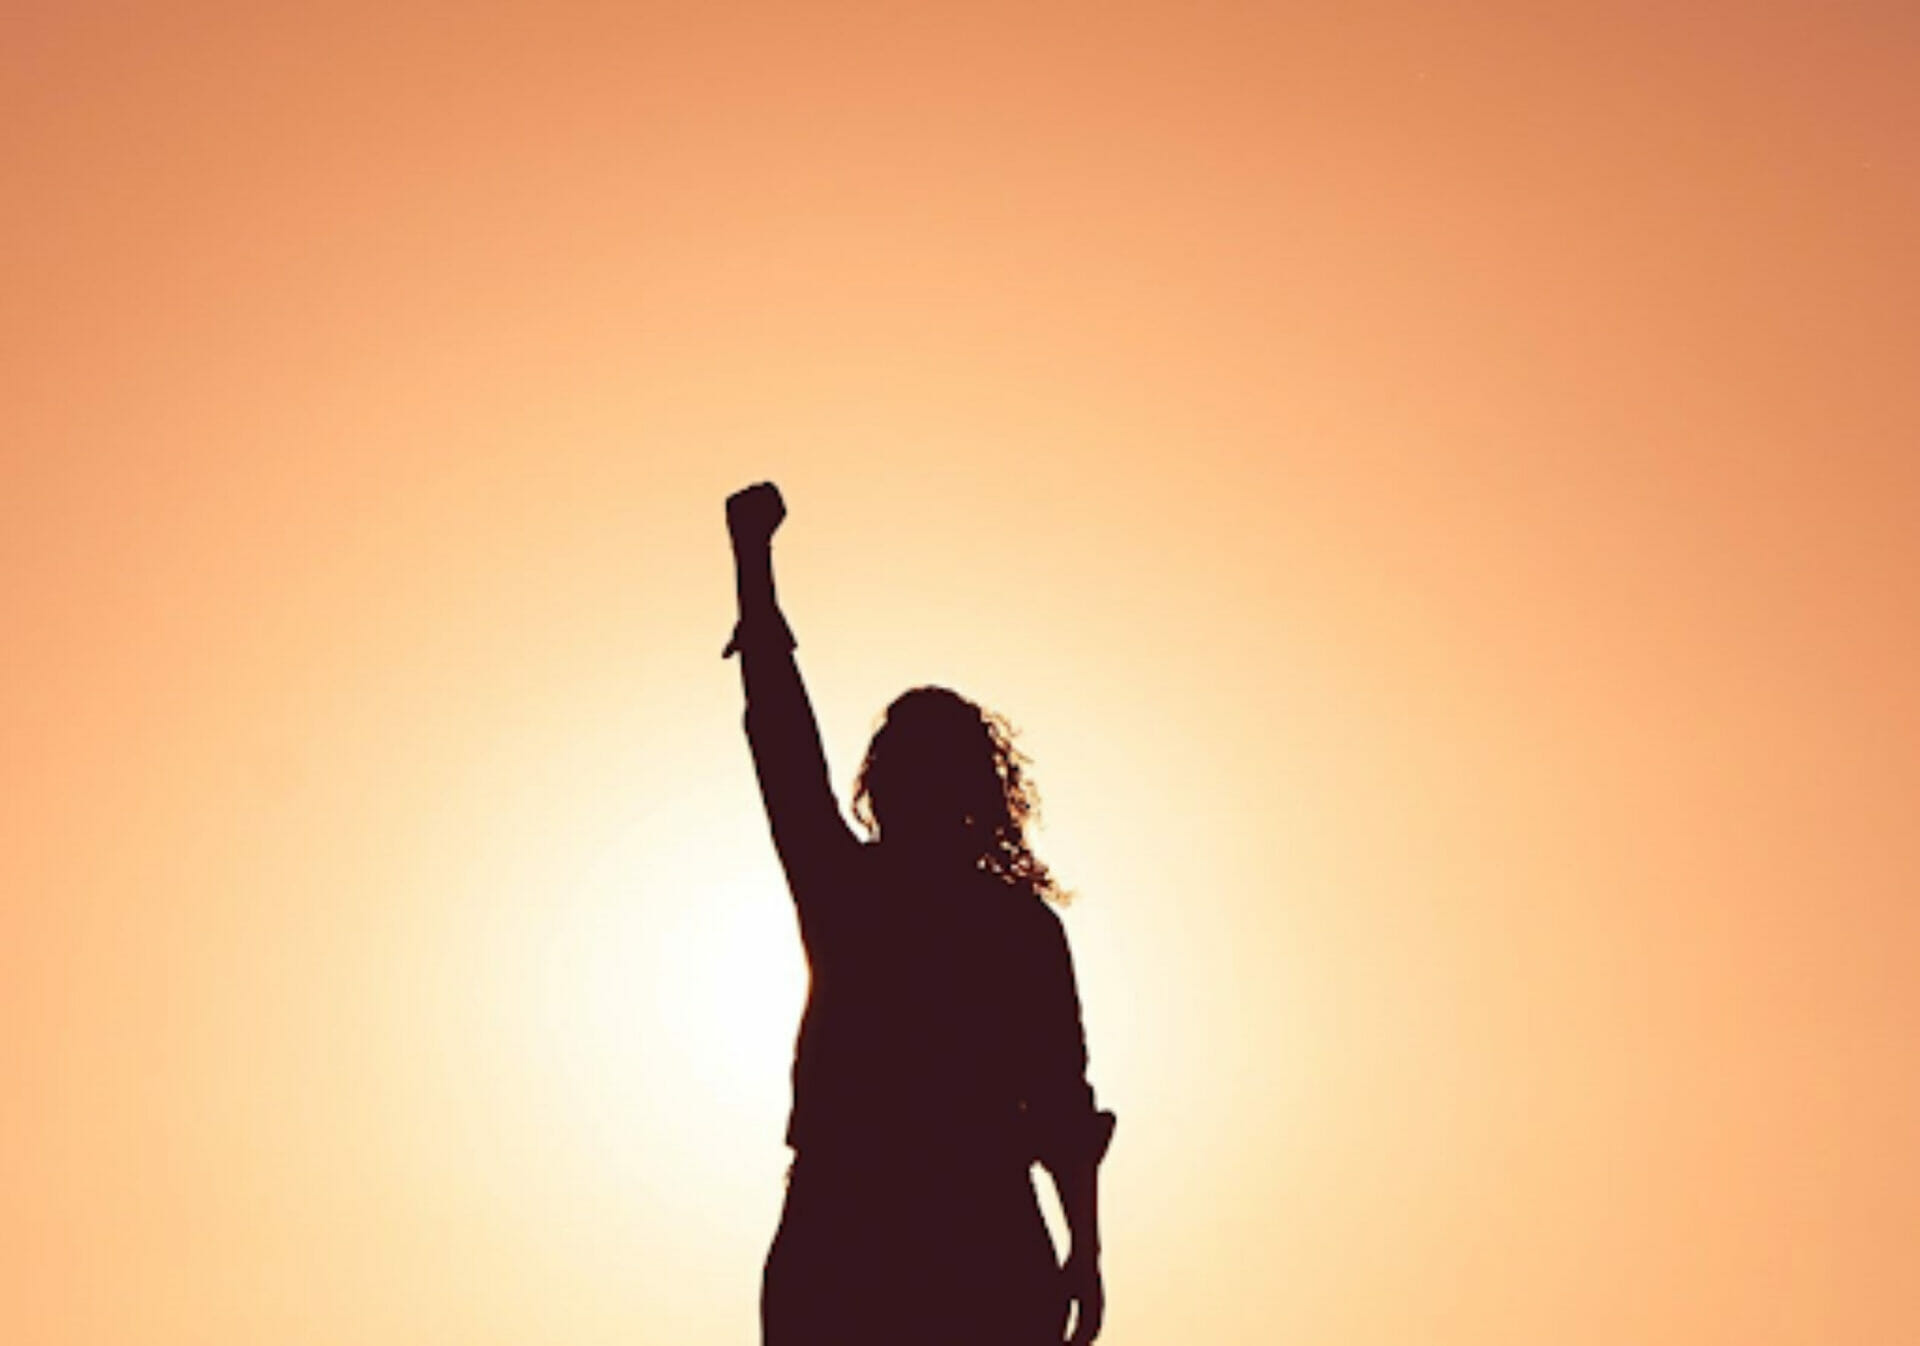 Woman's fist in the air with backlit peach background - Let’s Talk about Soft Power.